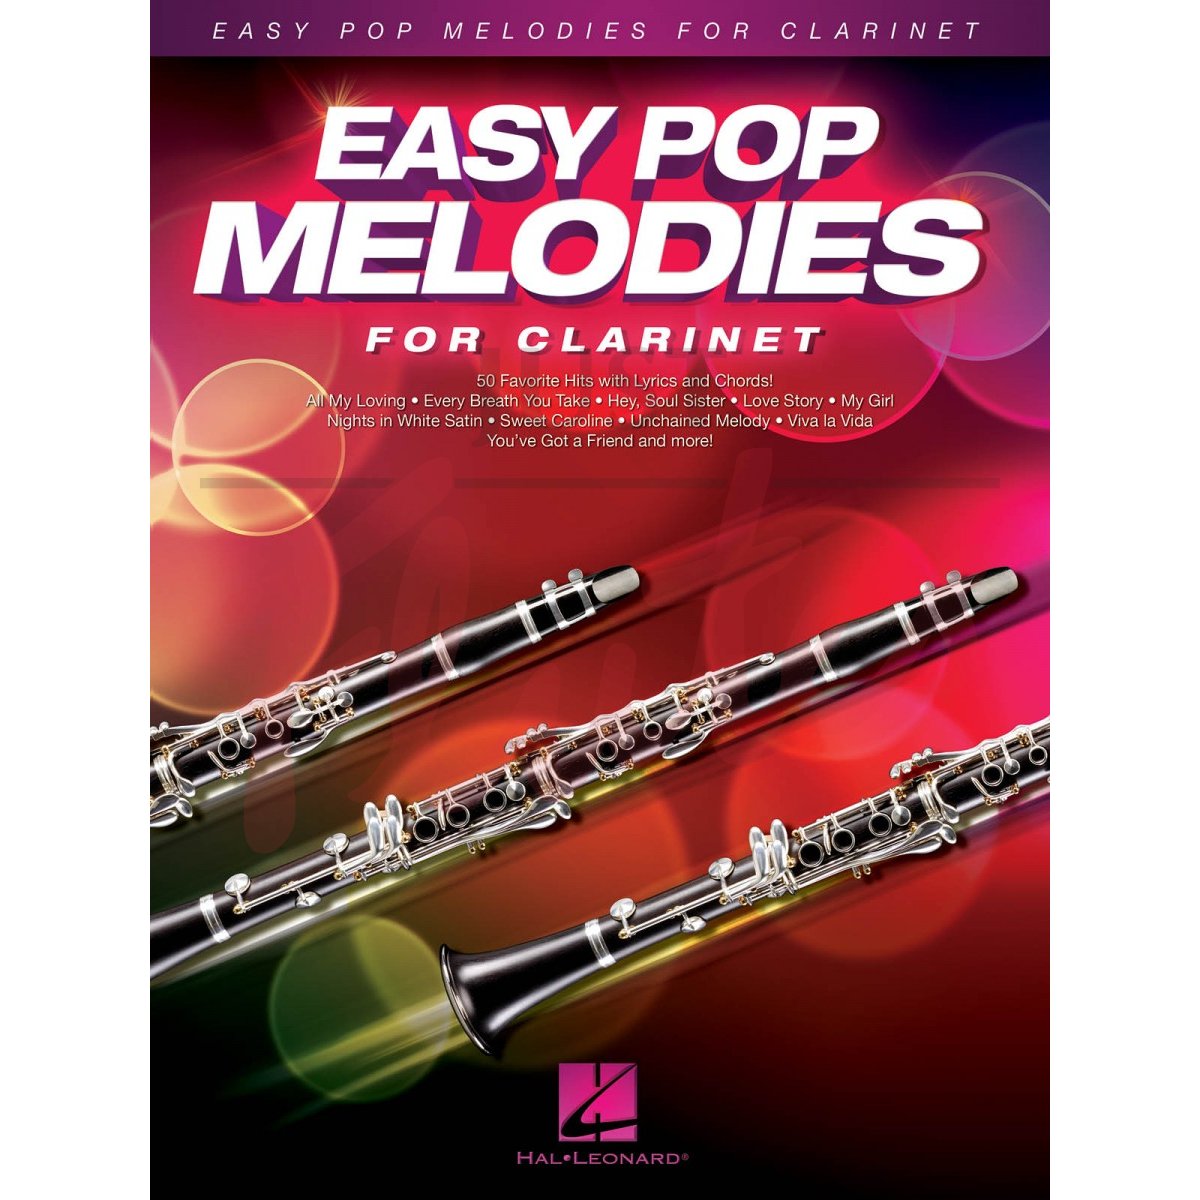 Easy Pop Melodies for Clarinet